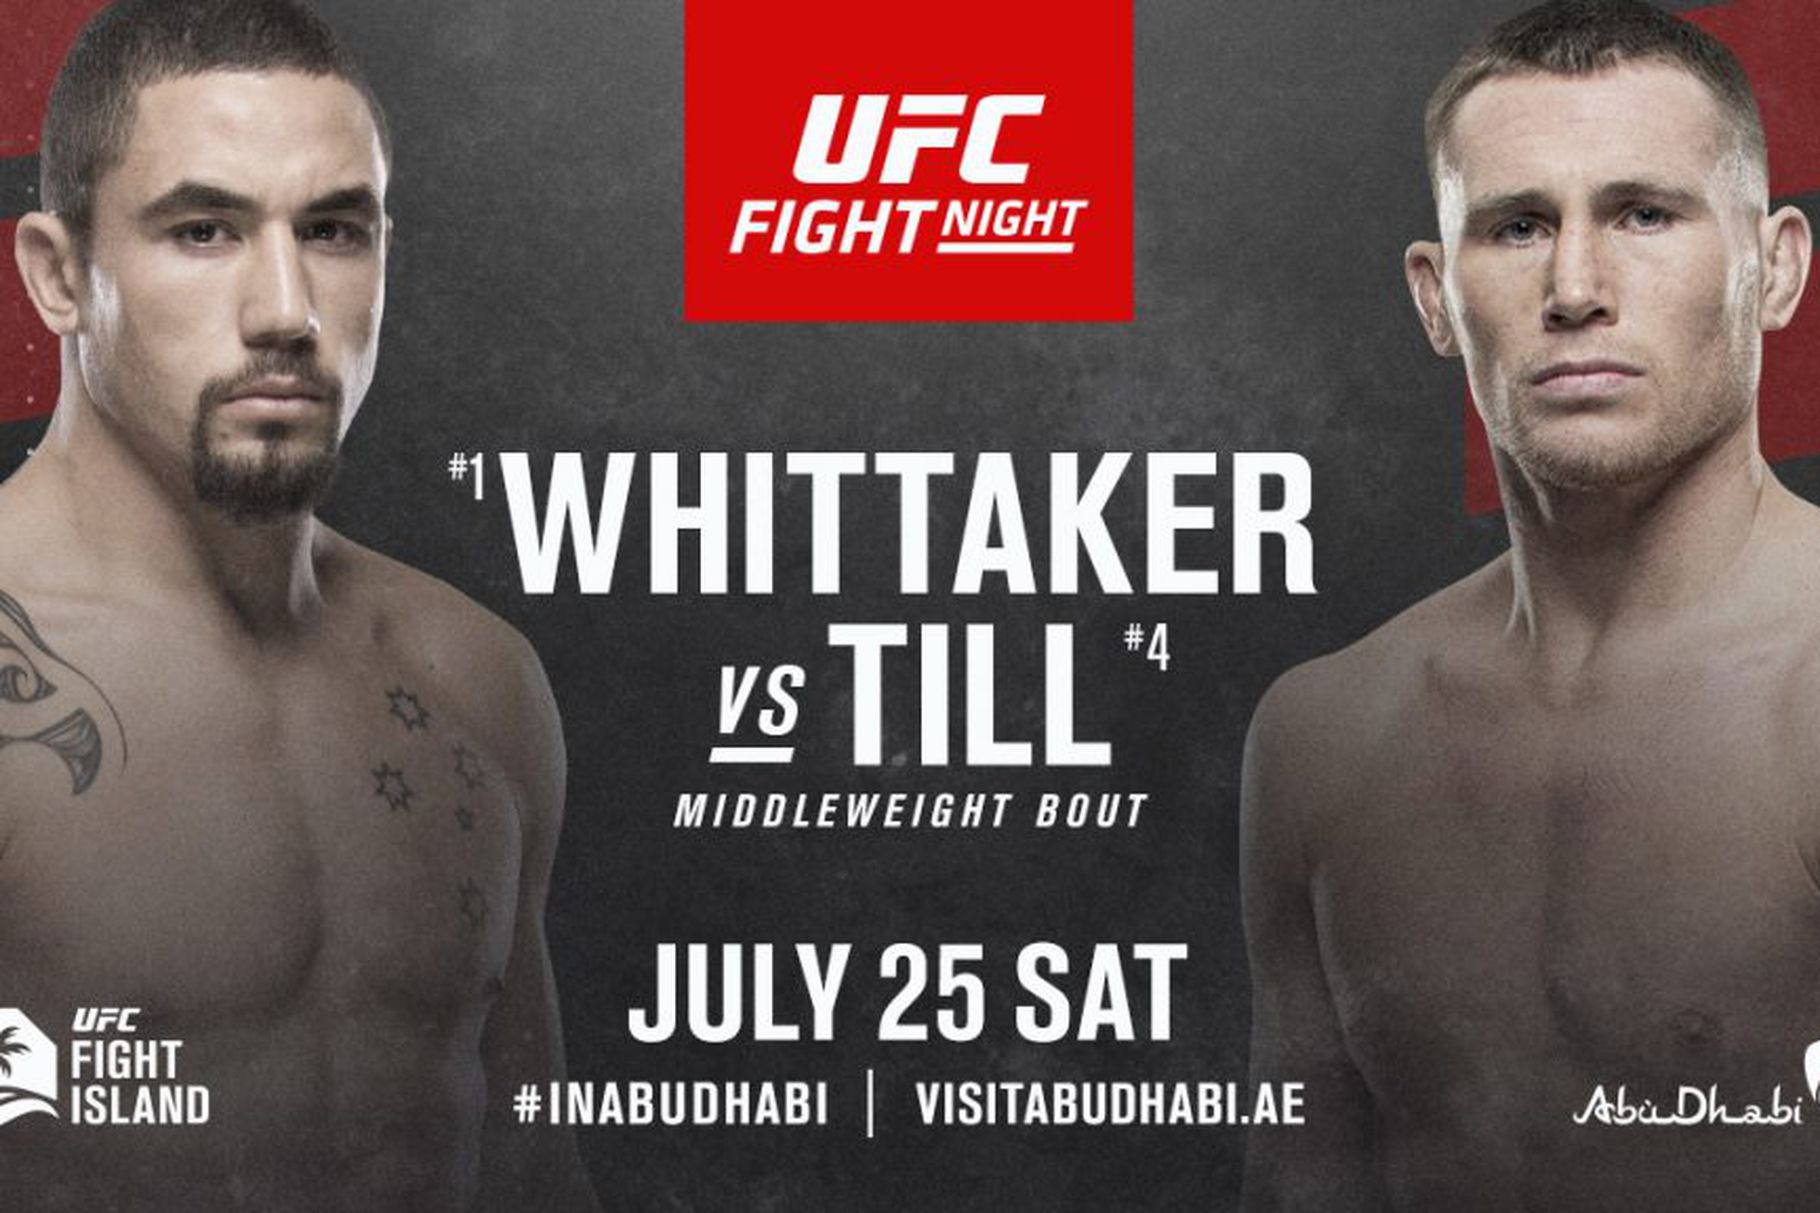 Latest UFC on ESPN 14 fight card, ‘Whittaker vs Till ’ line up for July